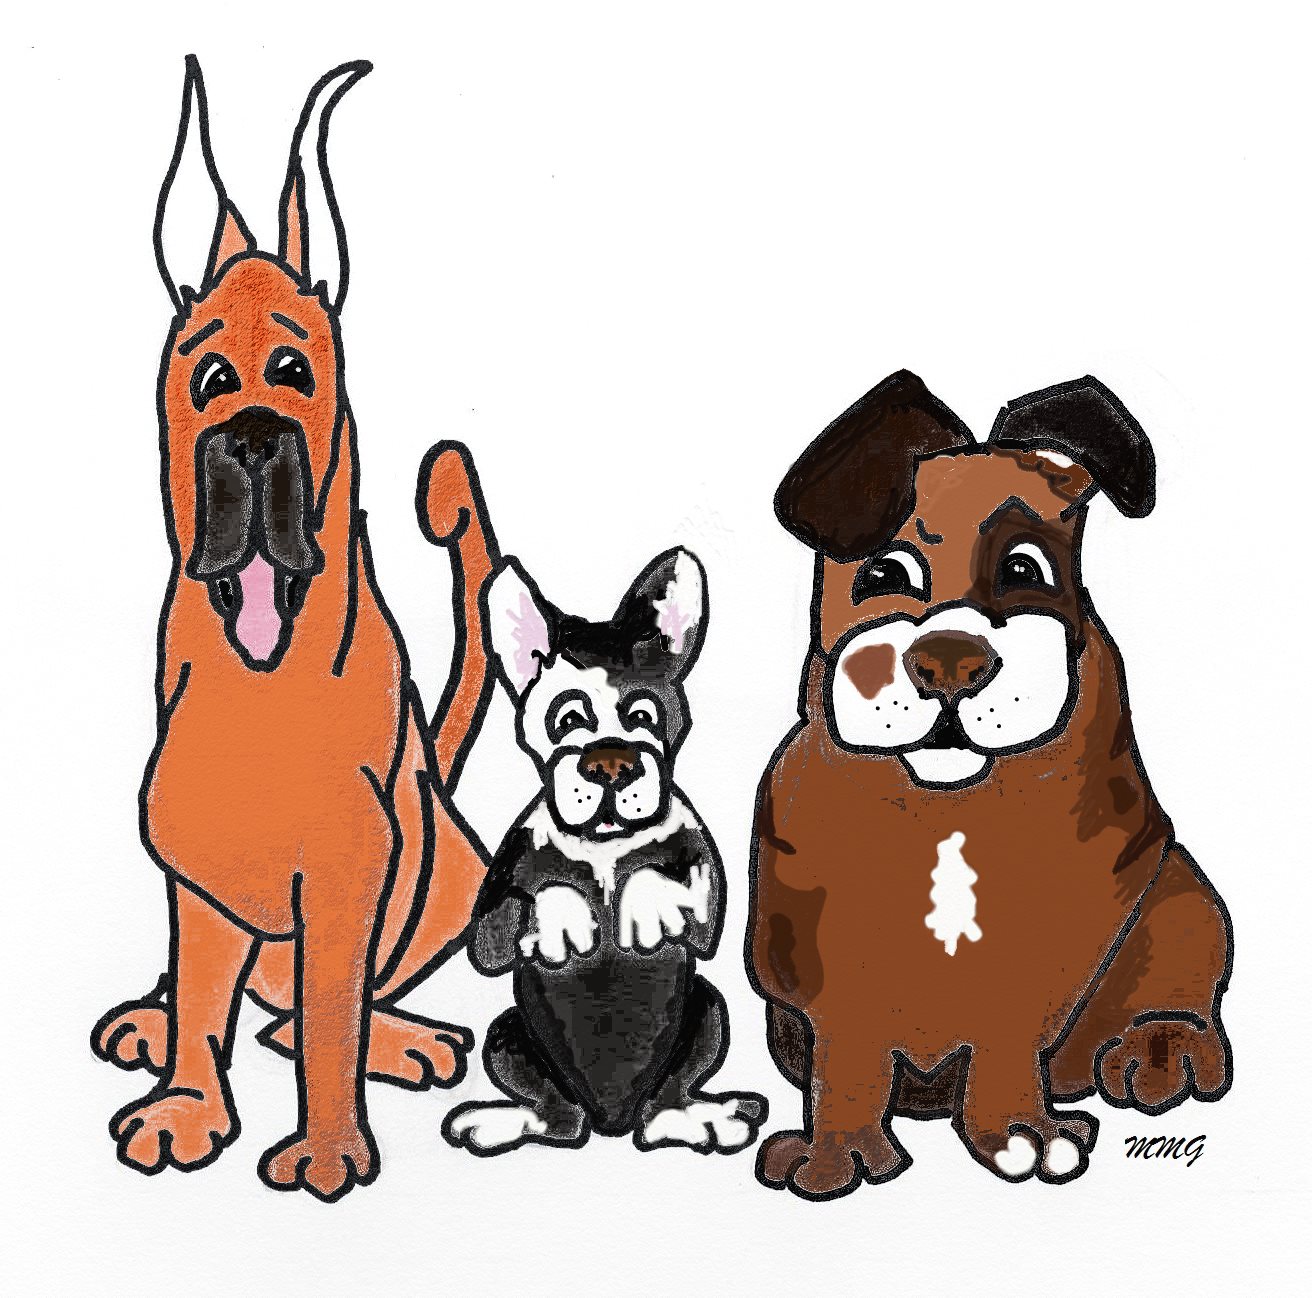 dogs clipart friend